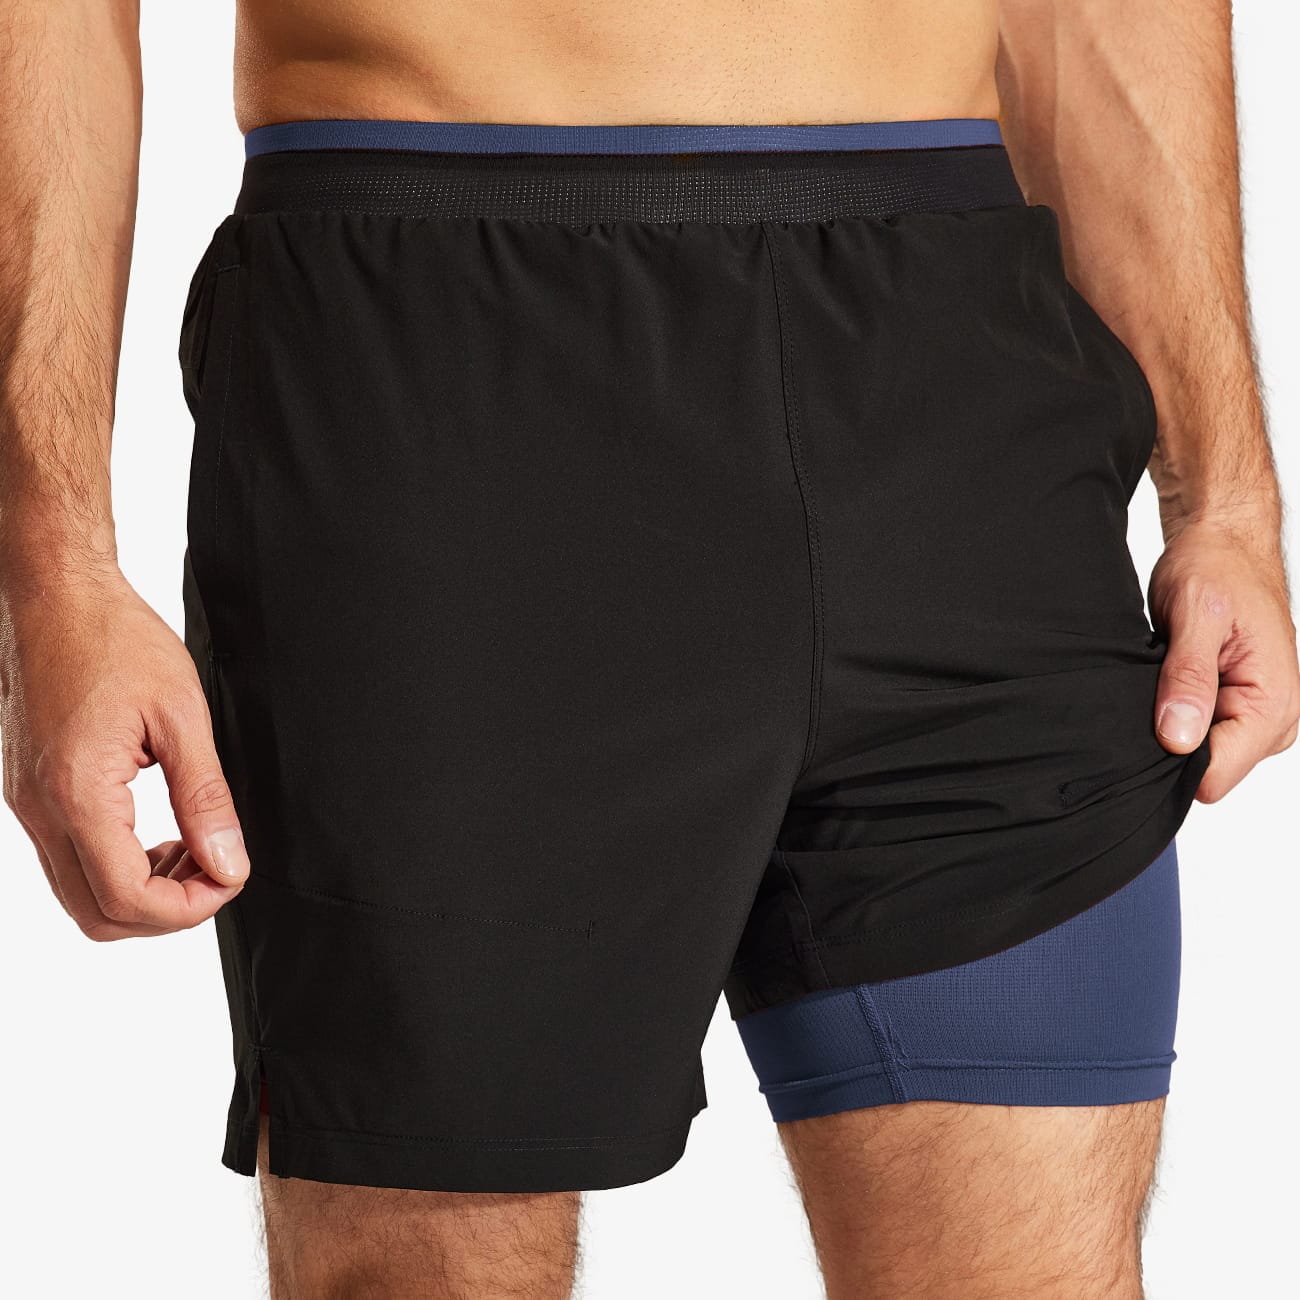 Men's 2 in 1 Running Shorts with Liner 5" Quick Dry Athletic Shorts Men's Shorts Black Blue / S MIER